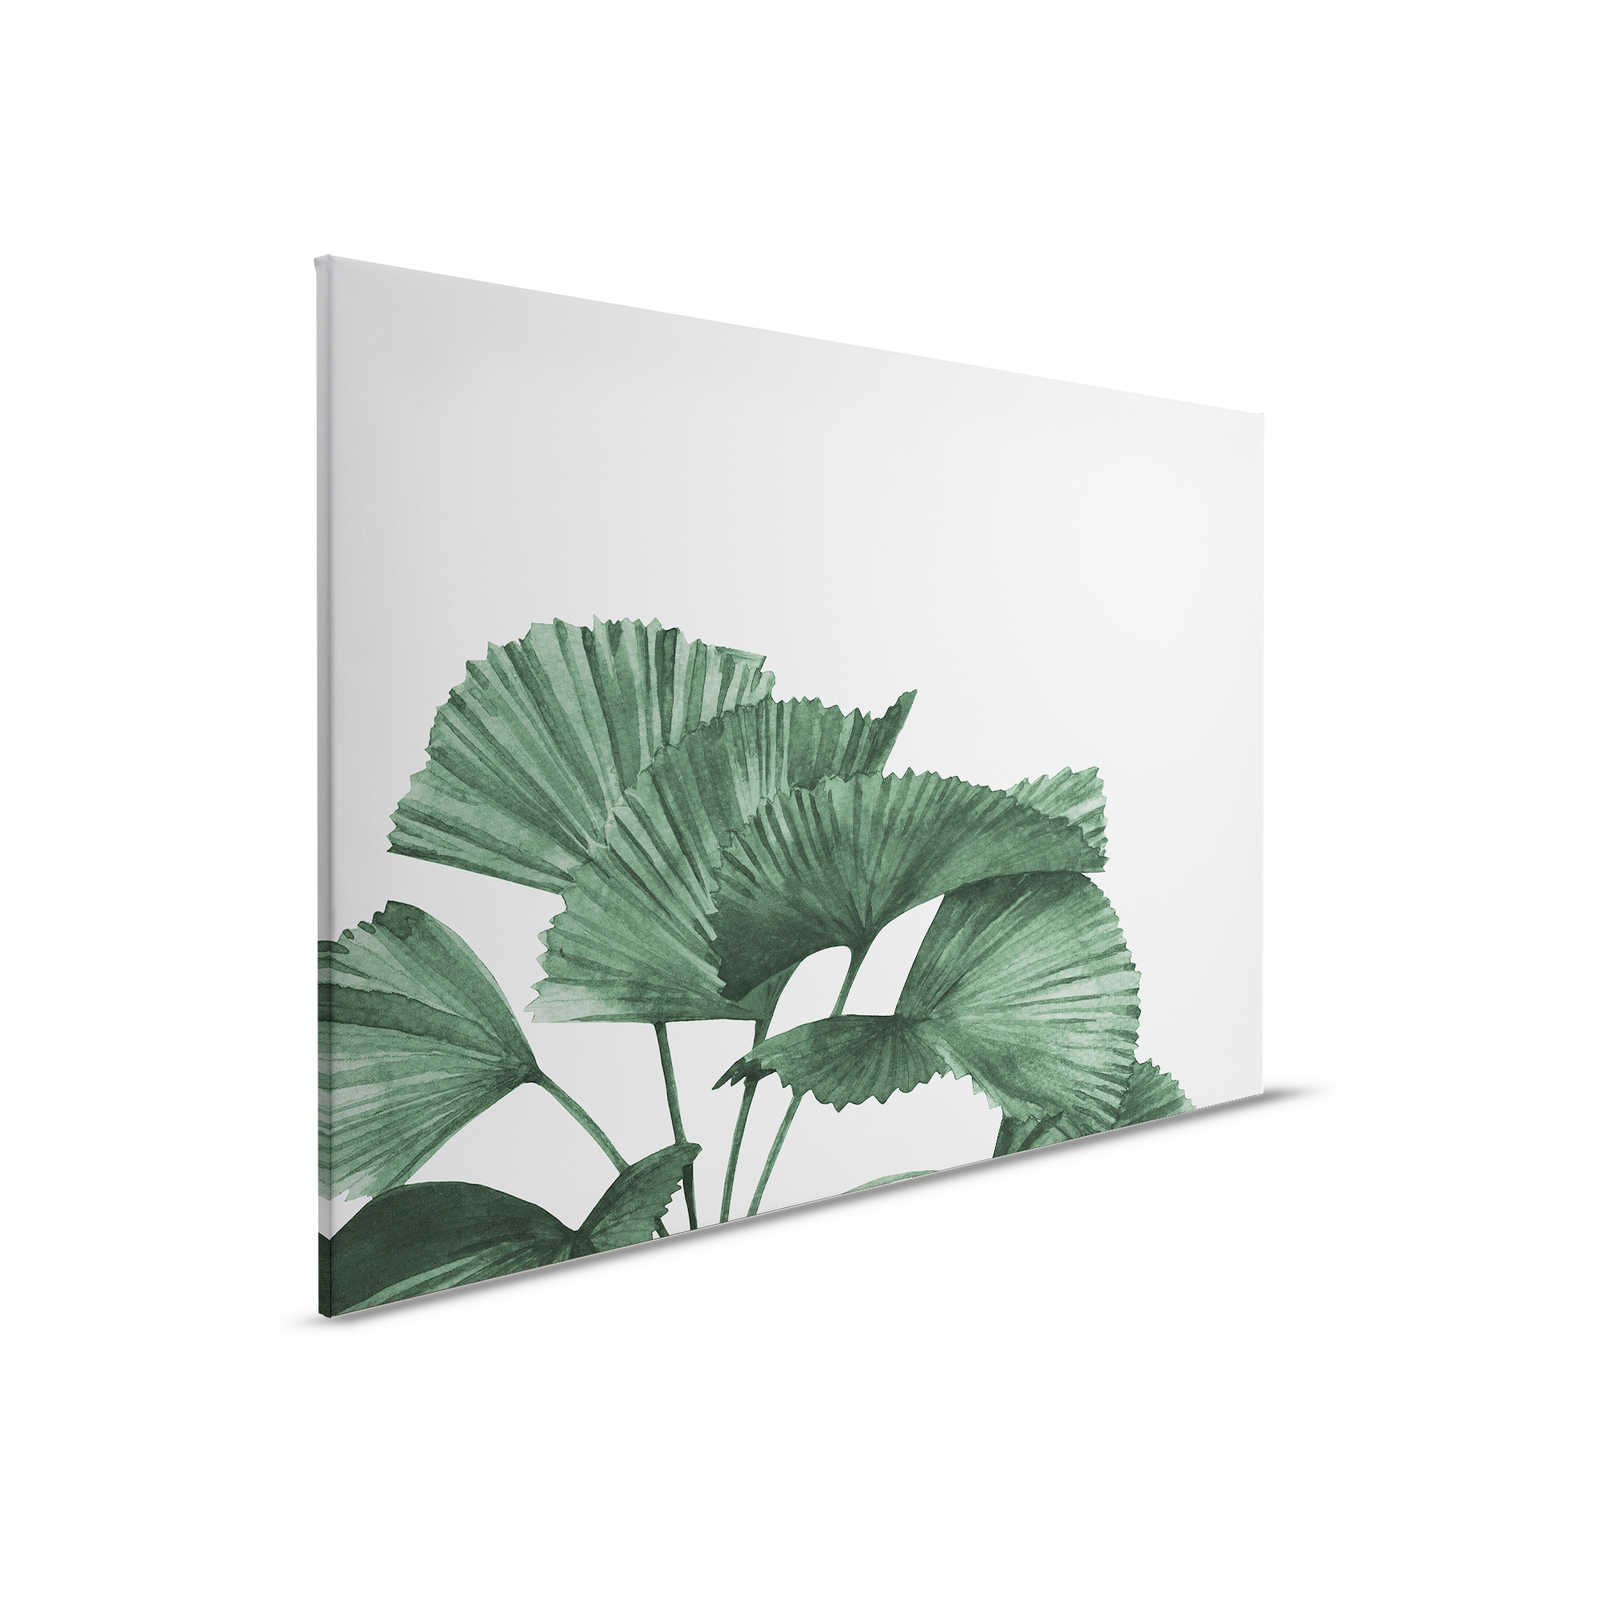         Canvas painting with large leaves of a ray palm - 0.90 m x 0.60 m
    